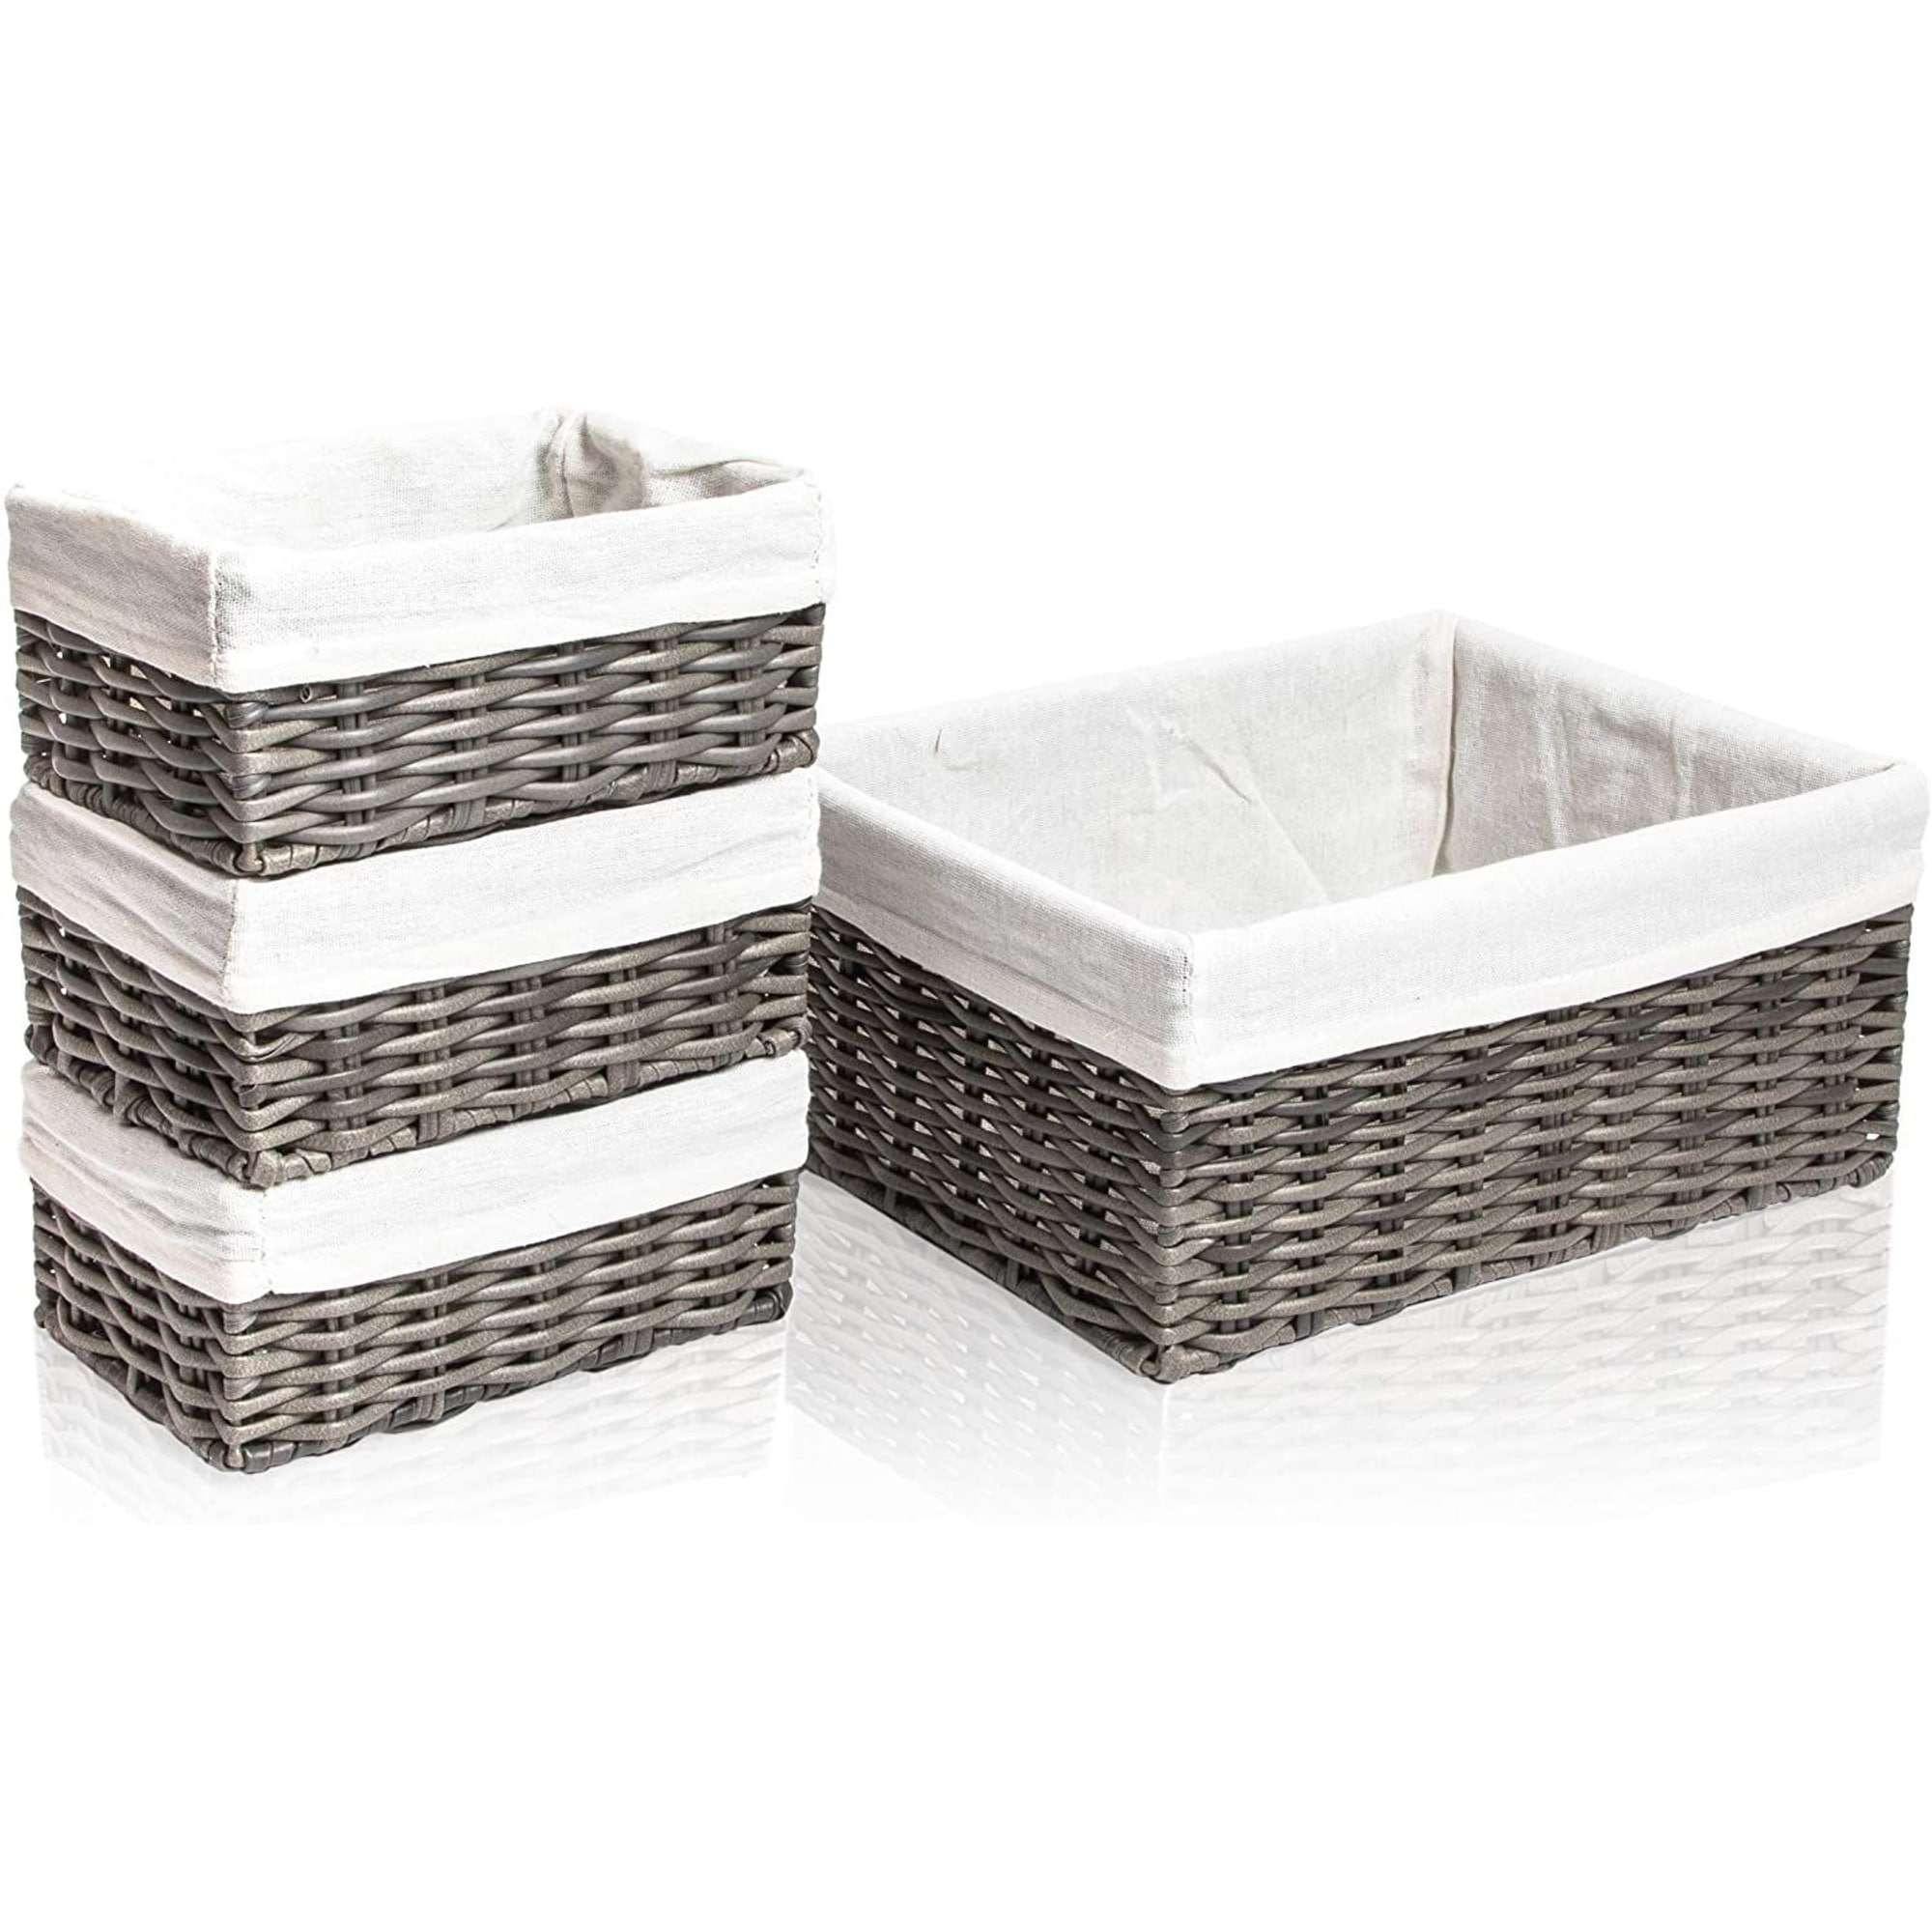 https://ak1.ostkcdn.com/images/products/is/images/direct/b996197b92ab4a07faca77ca5d8a82687e52ad44/Wicker-Storage-Baskets-with-Liners%2C-2-Sizes-%28Grey%2C-4-Pieces%29.jpg